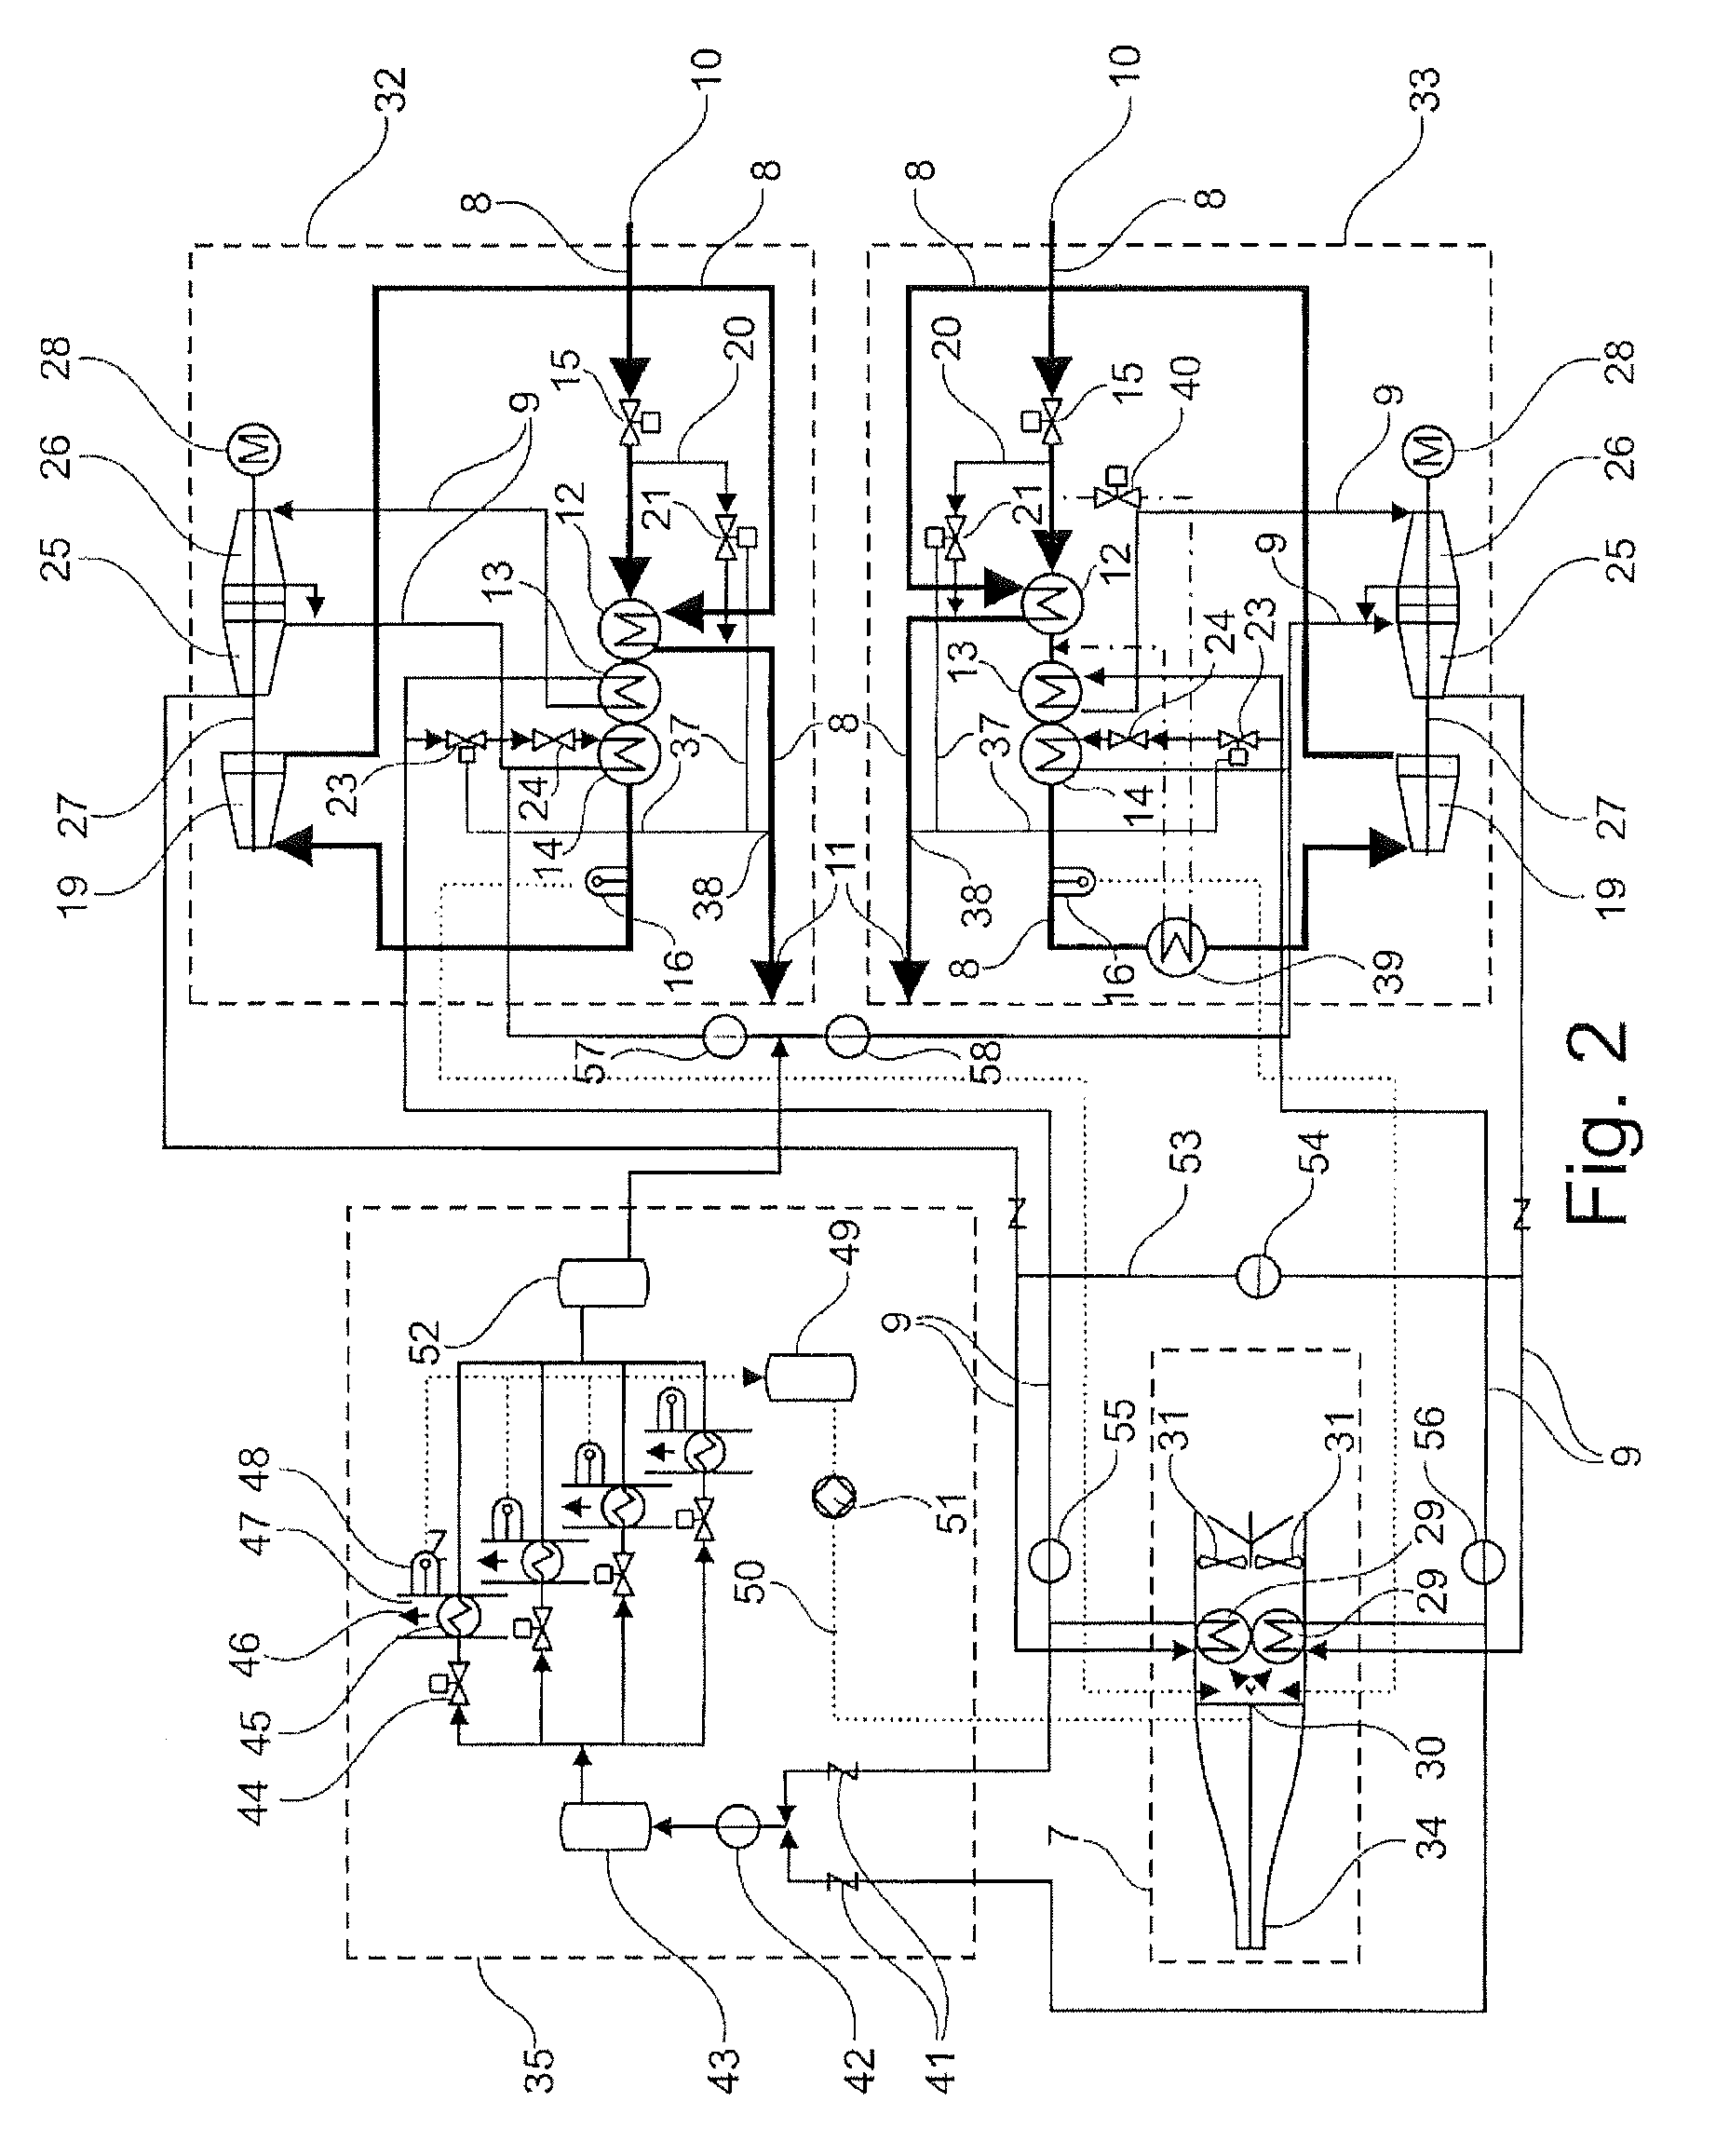 Aircraft air conditioning system comprising a separate refrigeration cycle